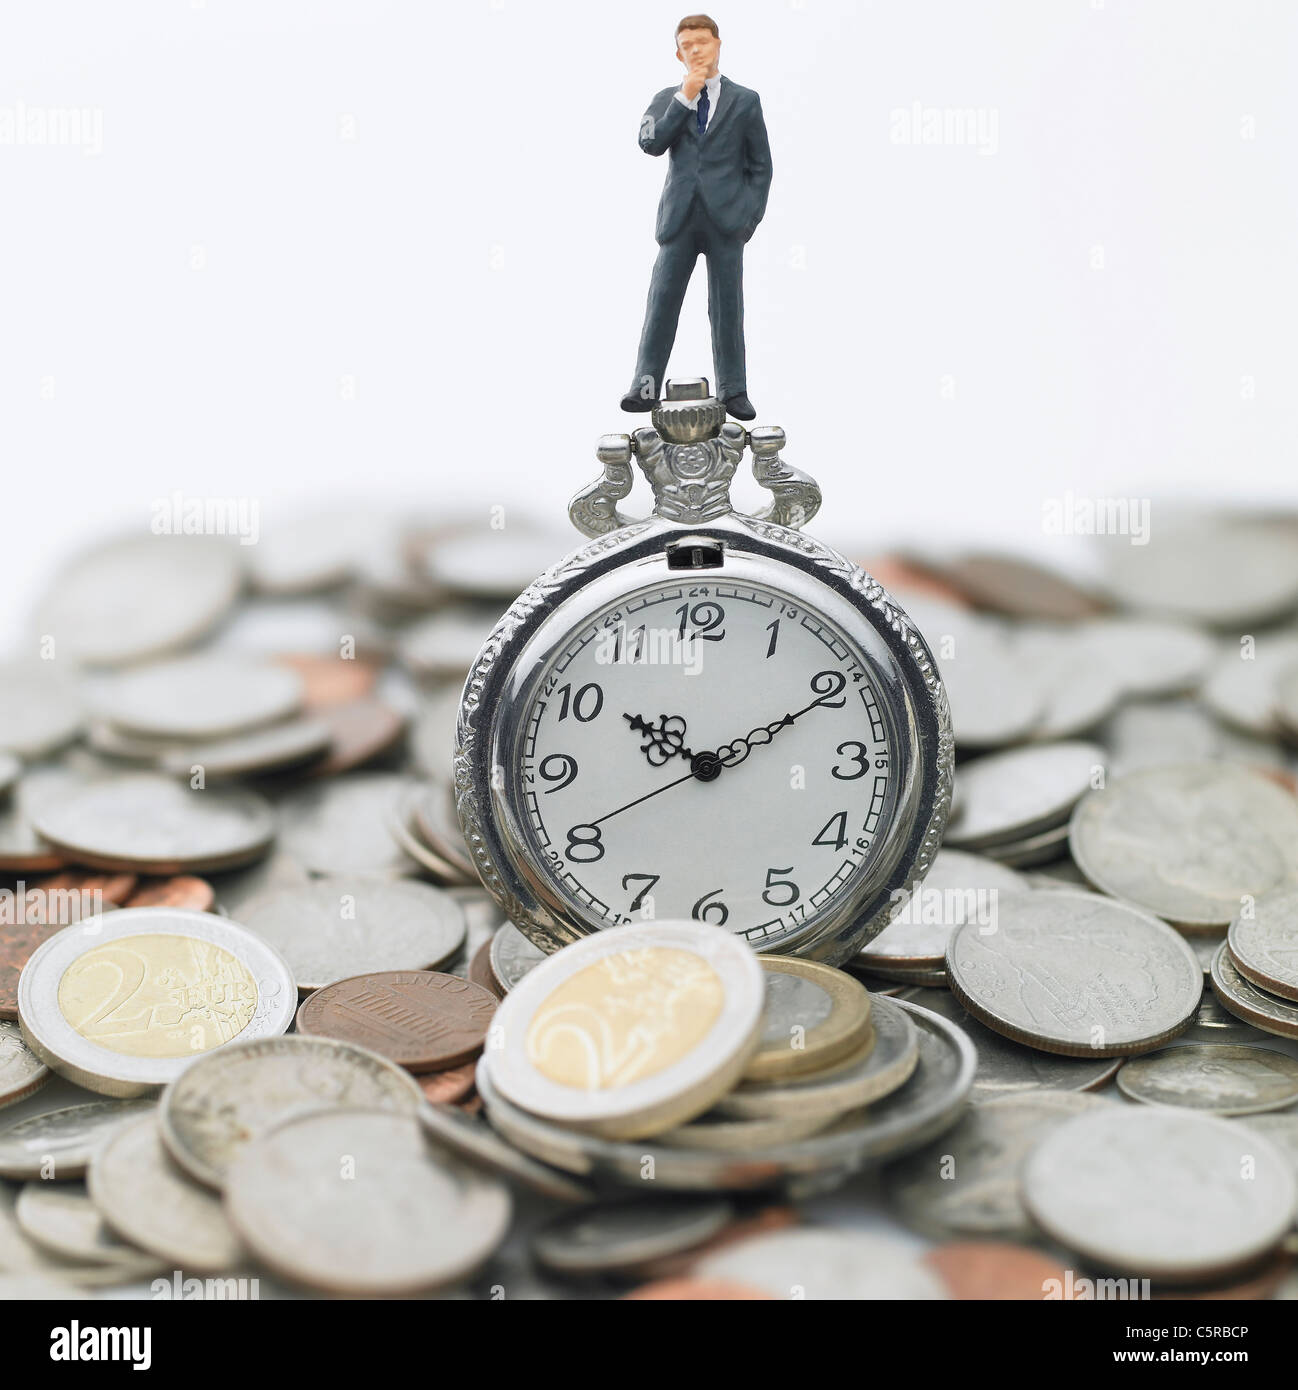 A figurine on a pocket watch and coins Stock Photo